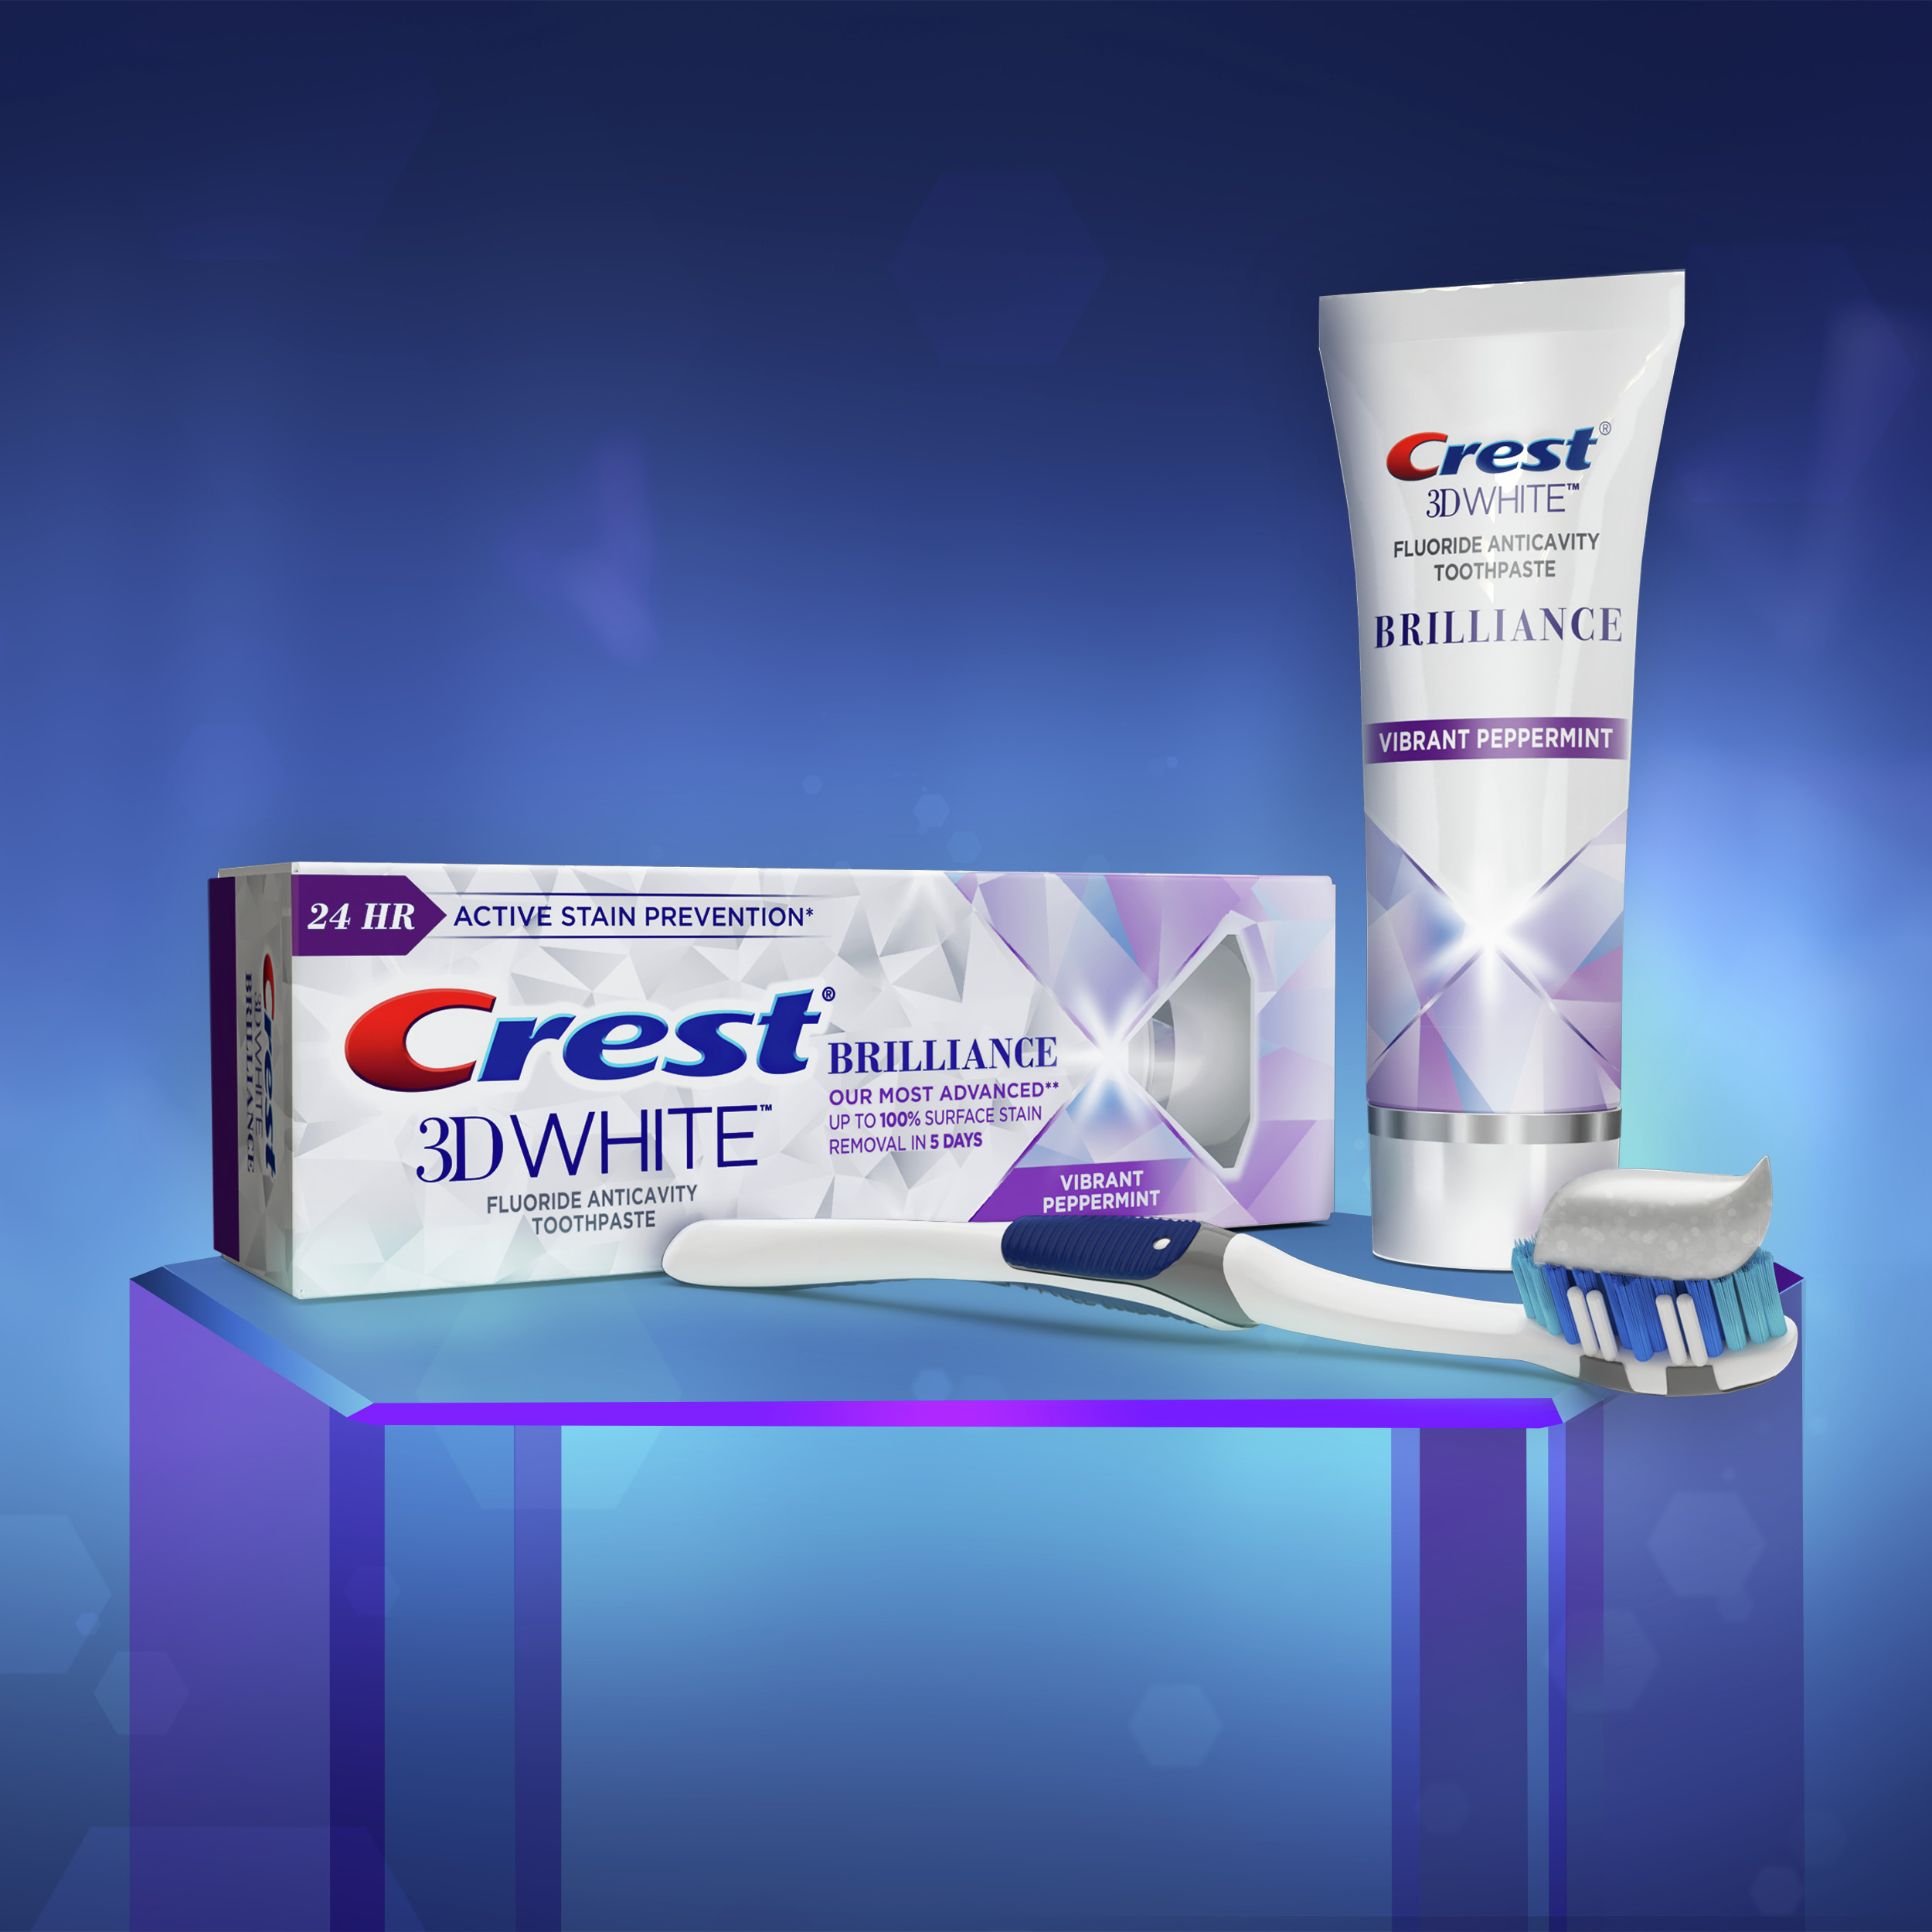 Crest 3D White Brilliance Toothpaste, Vibrant Peppermint, 3.9 oz, Pack of 2 - image 3 of 10